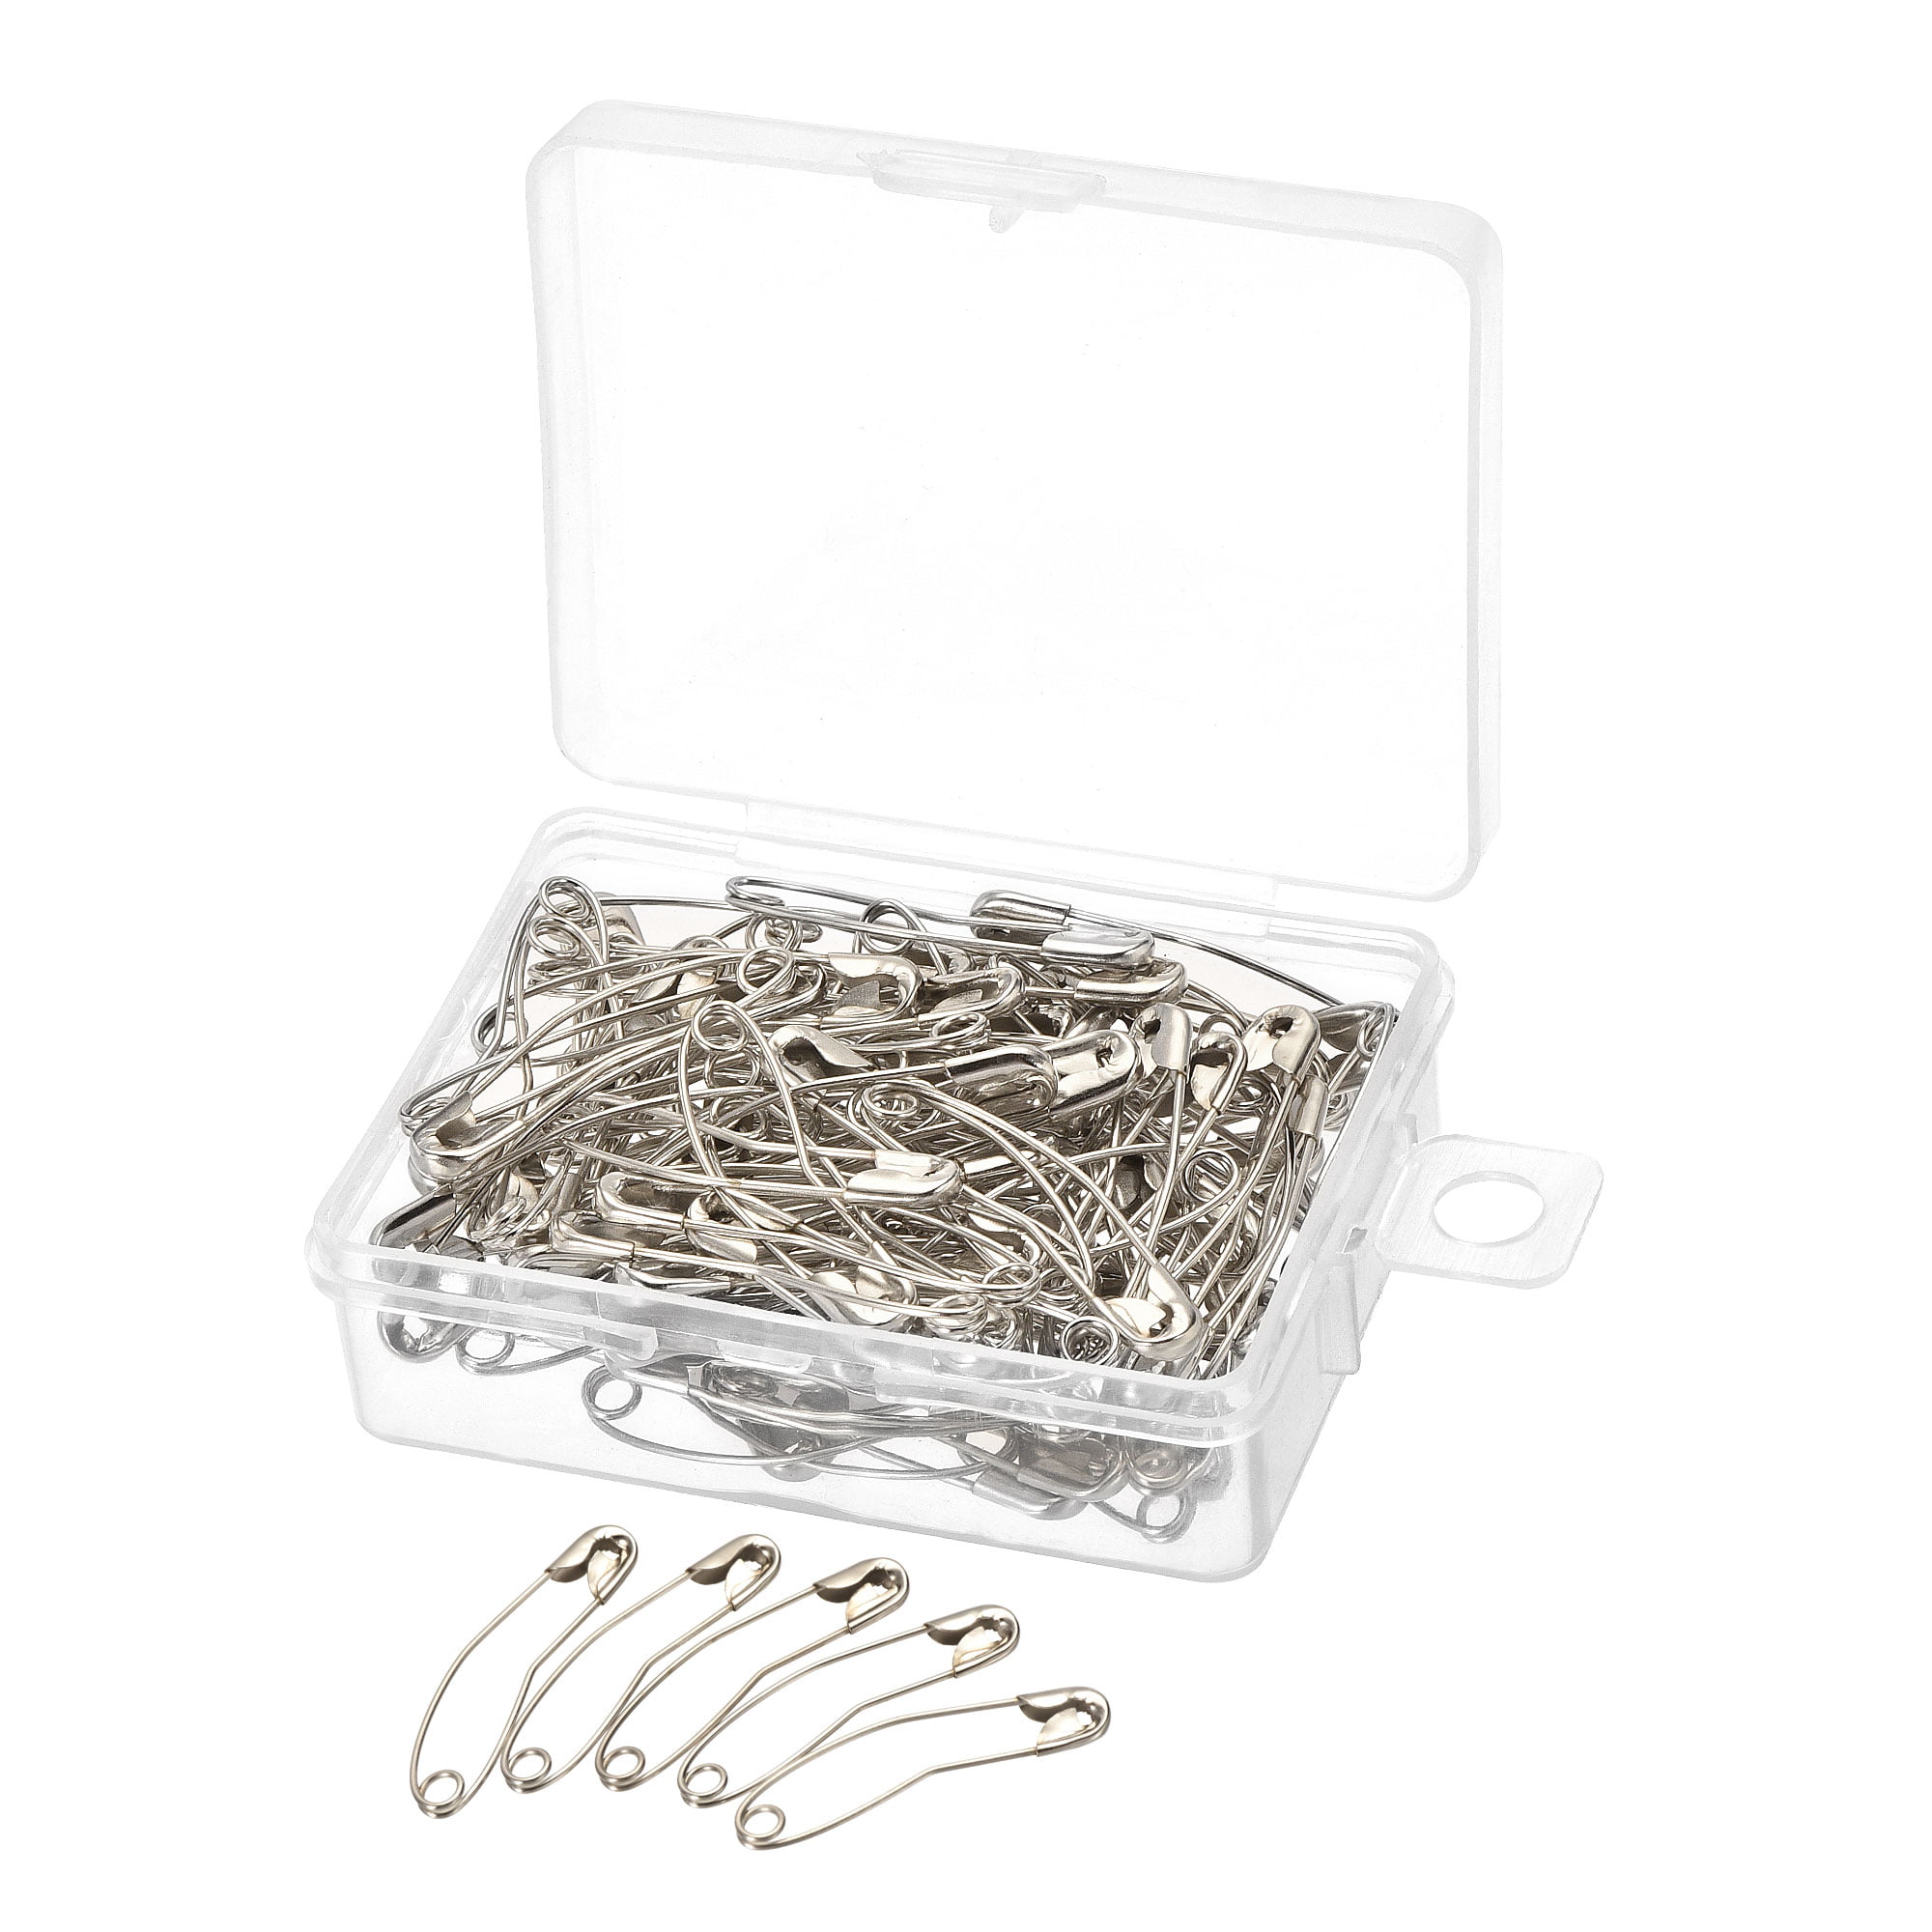 Ruidee 500 Pcs Metal Mini Safety Pins for Home Office Use Art Craft Sewing Jewelry Making (Silver)